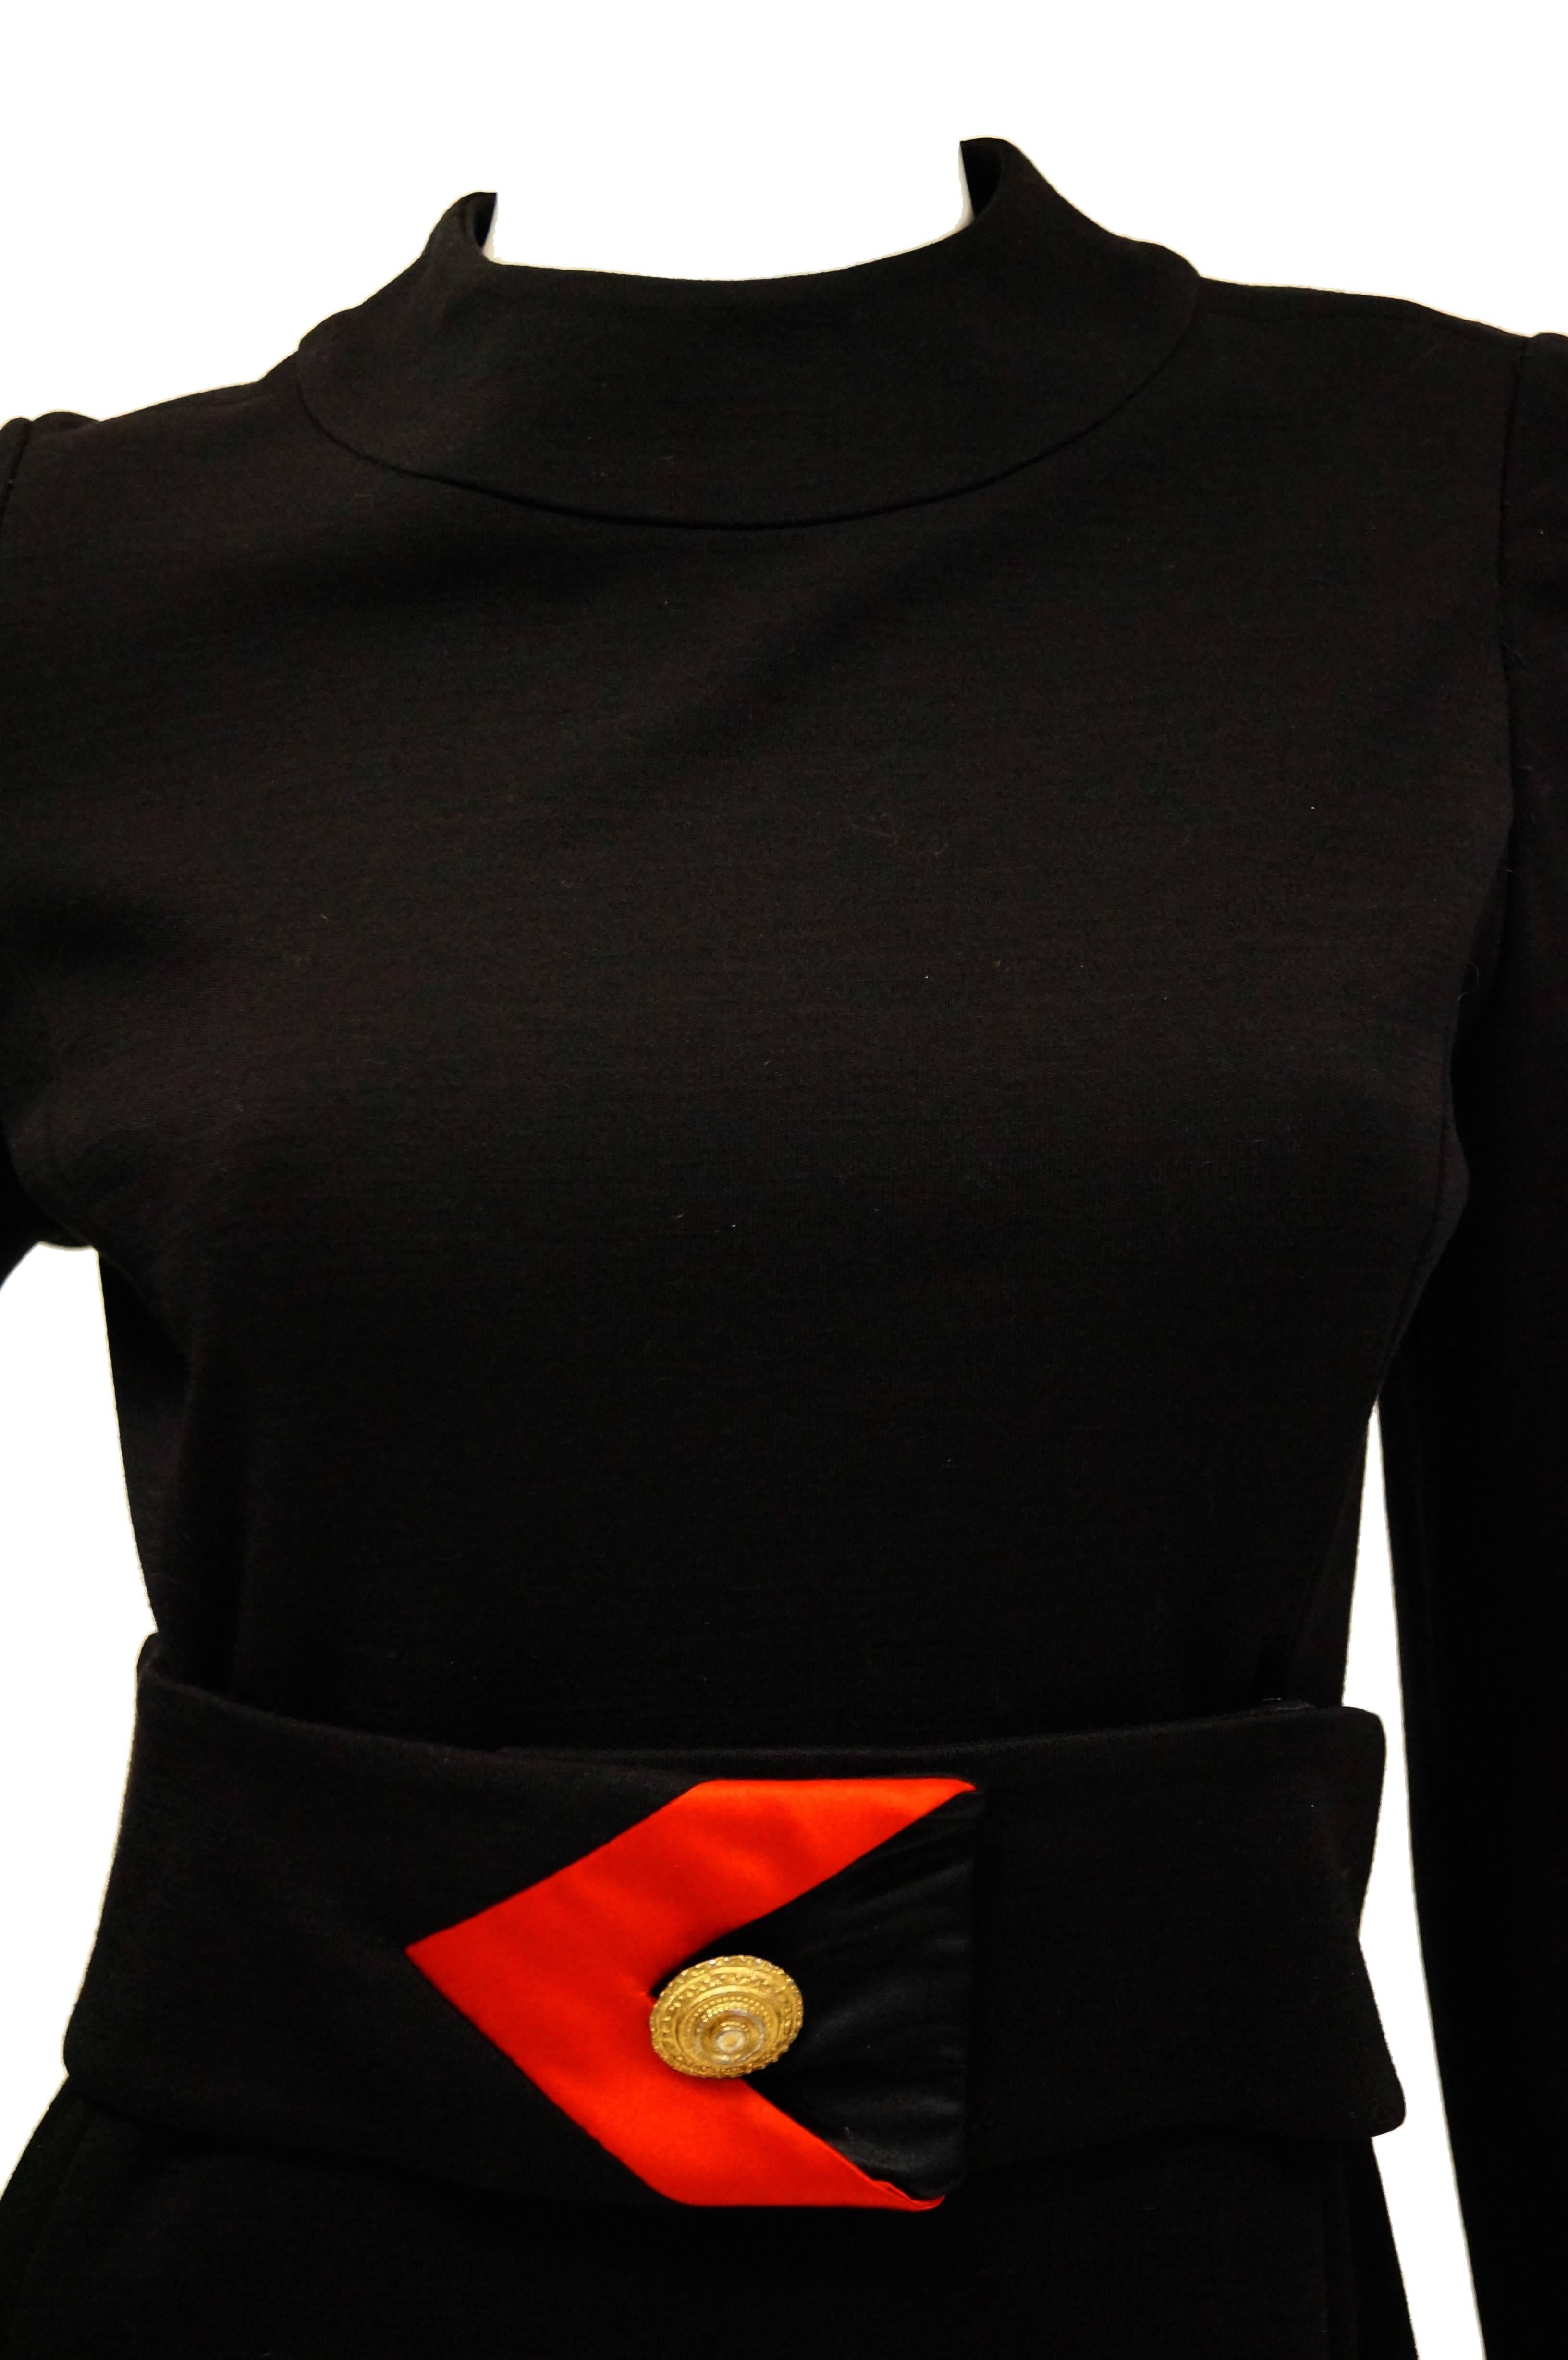 Striking black and red knit dress by Muriel Reade for Joseph Stein. The dress features a loose A - line silhouette with long sleeves and a tight jewel collar. The narrow waist of the dress is accented by a wide black belt with buckle - like arrow